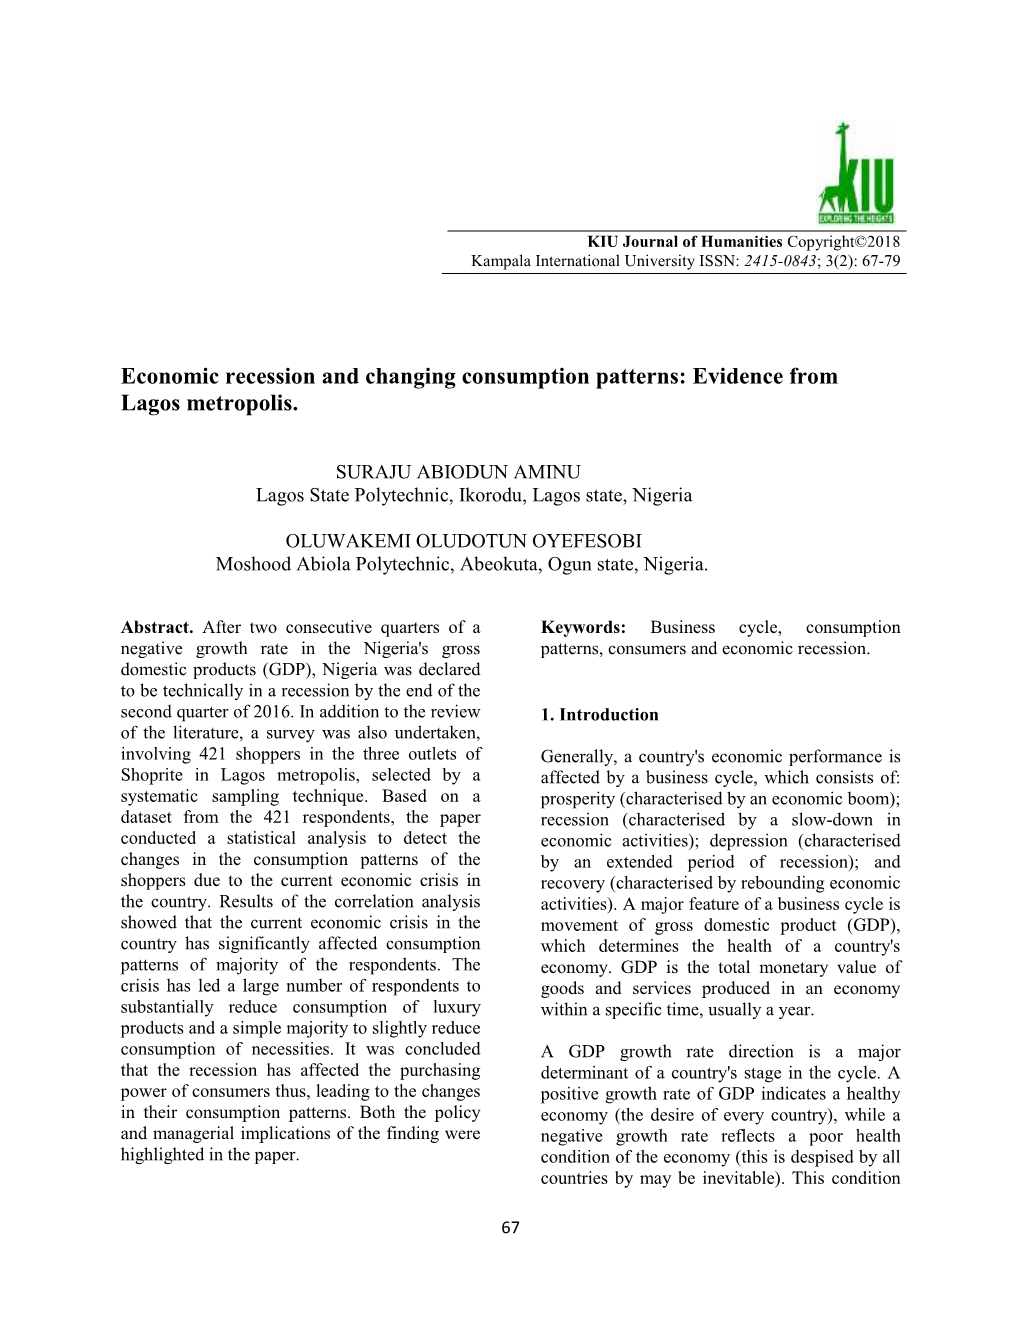 Economic Recession and Changing Consumption Patterns: Evidence from Lagos Metropolis